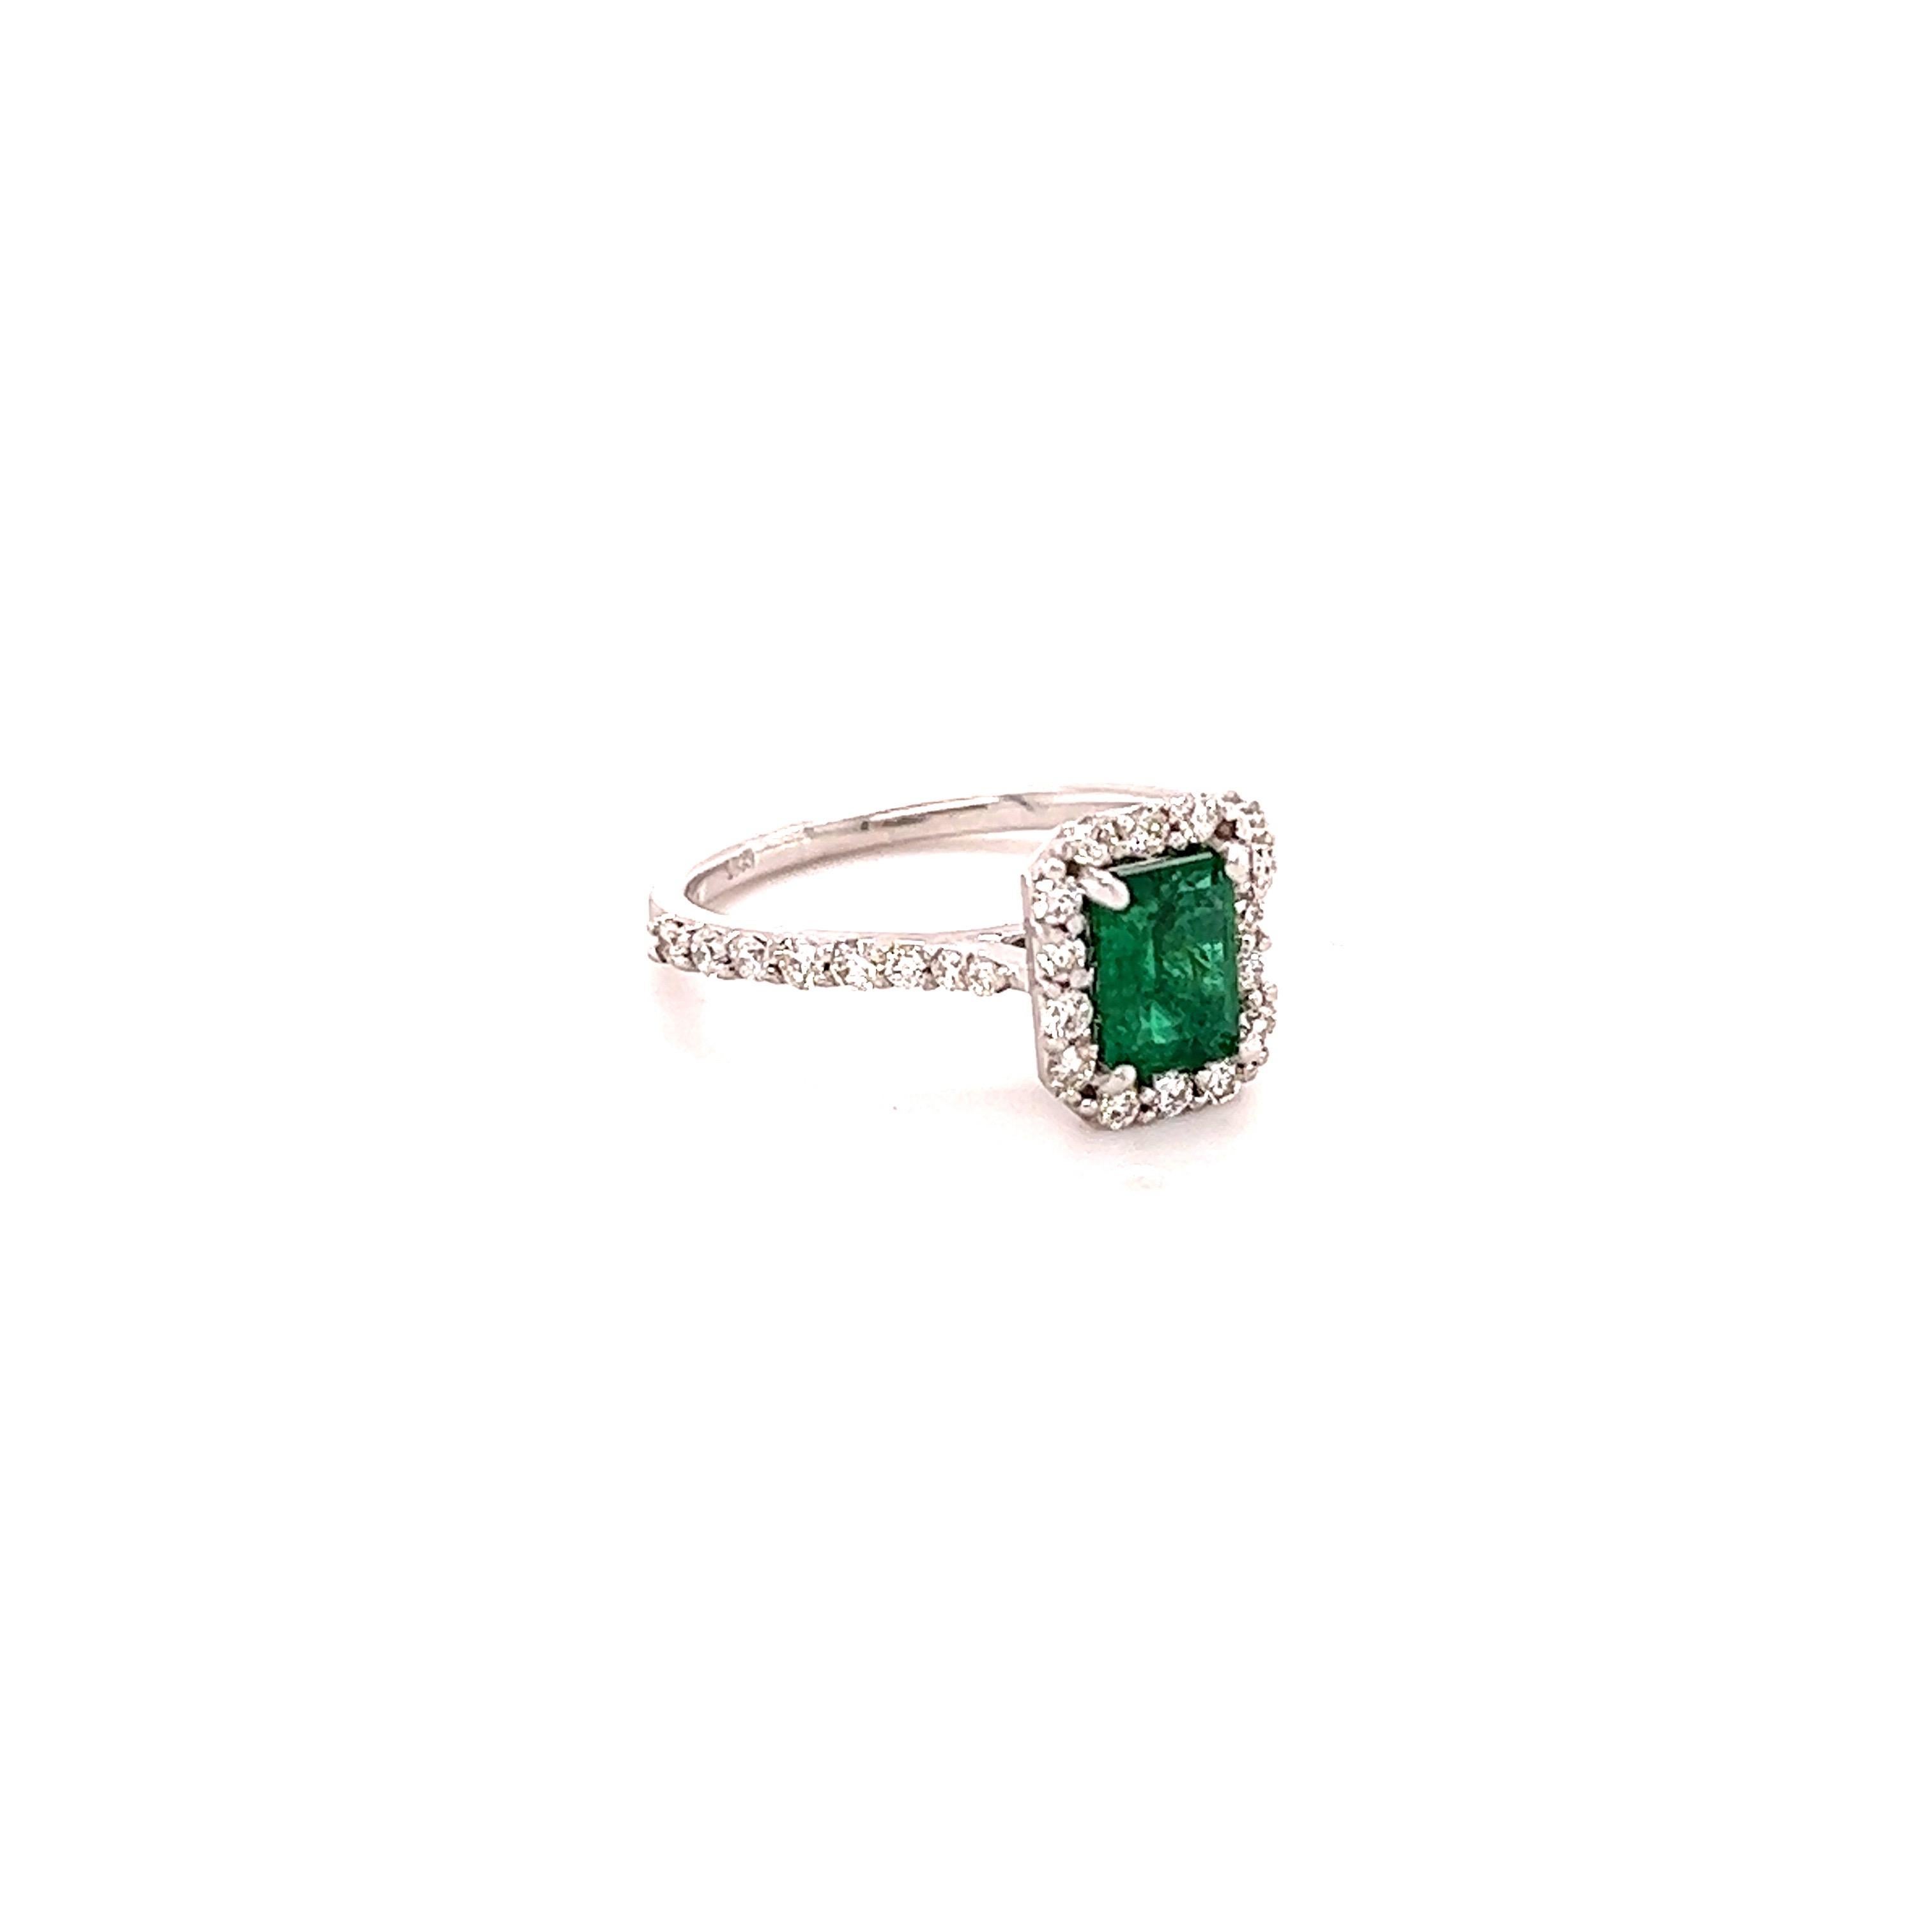 A beautiful & classic setting holding a Natural Emerald that weighs 0.76 carats. Surrounded by 30 Round Cut Diamonds that weigh 0.55 carats with a clarity & color of VS-H.  The total carat weight of the ring is 1.31 carats.

The Emerald Cut Emerald